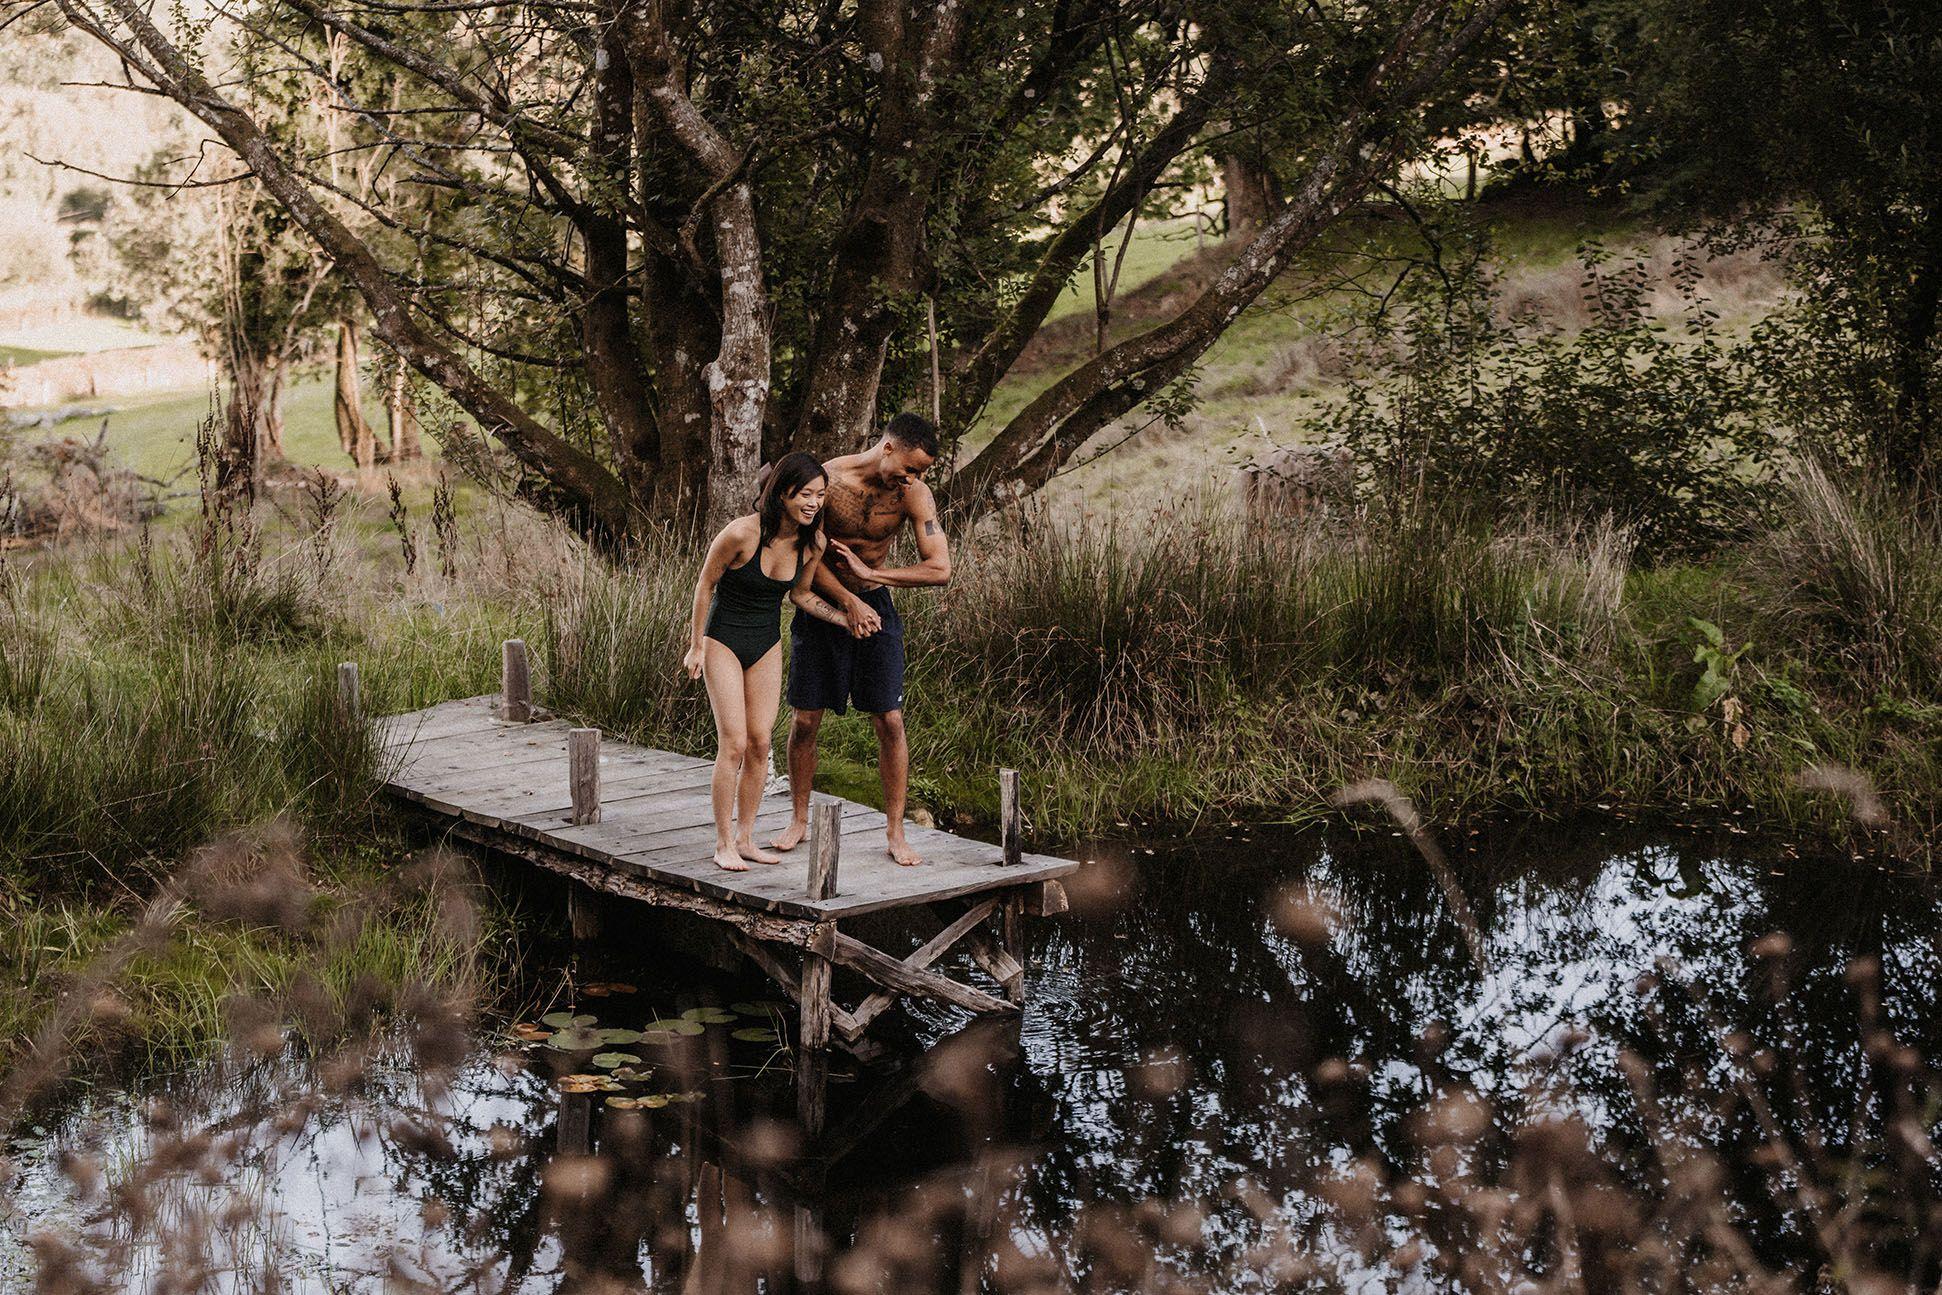 Two people diving into a wild pond 